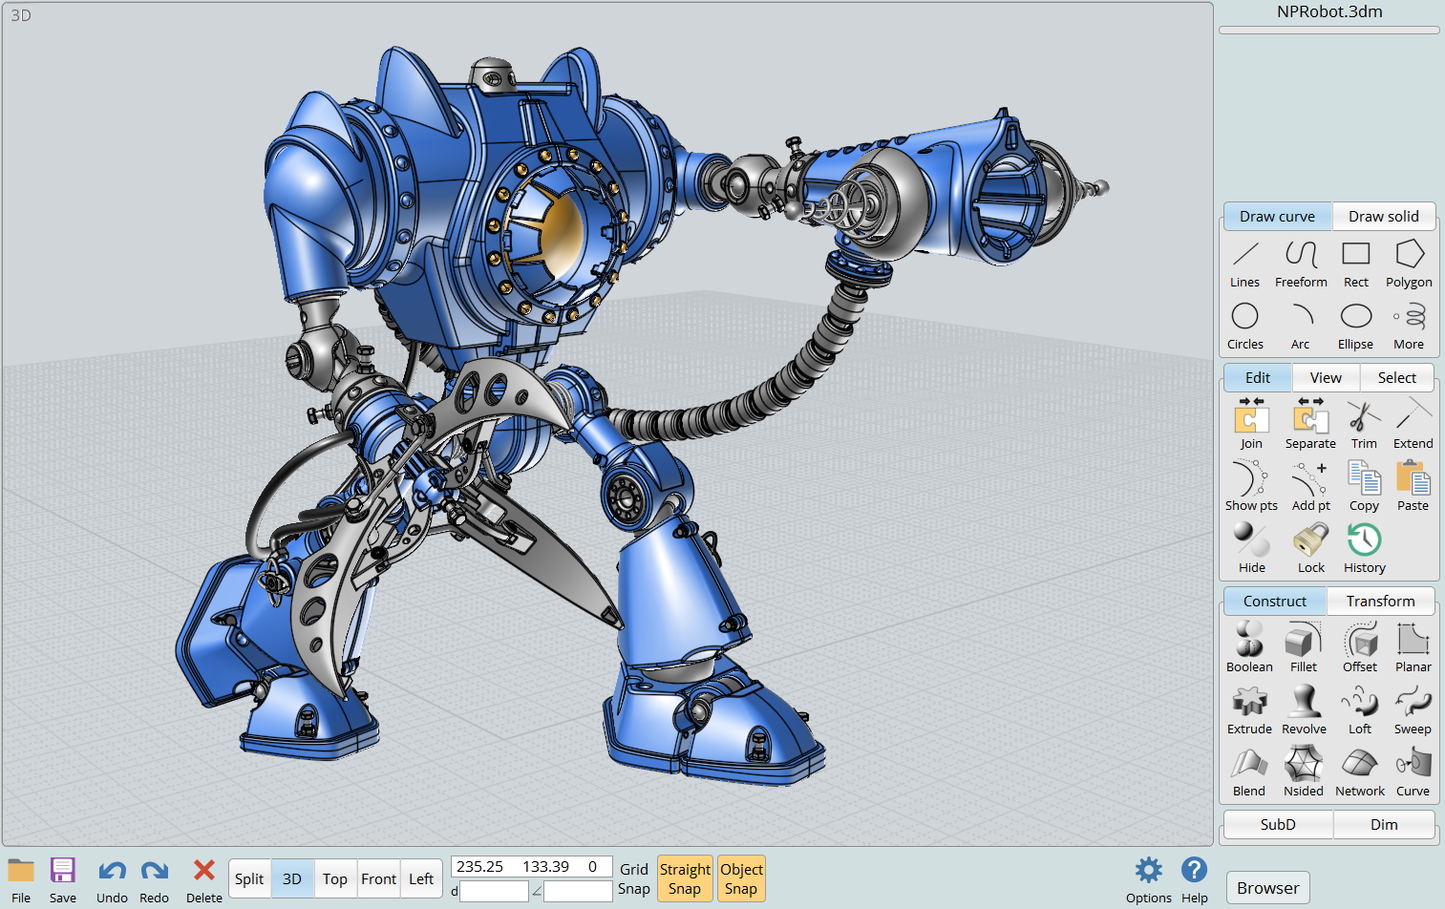 Moment of Inspiration v4 - Creativity with Intuitive CAD